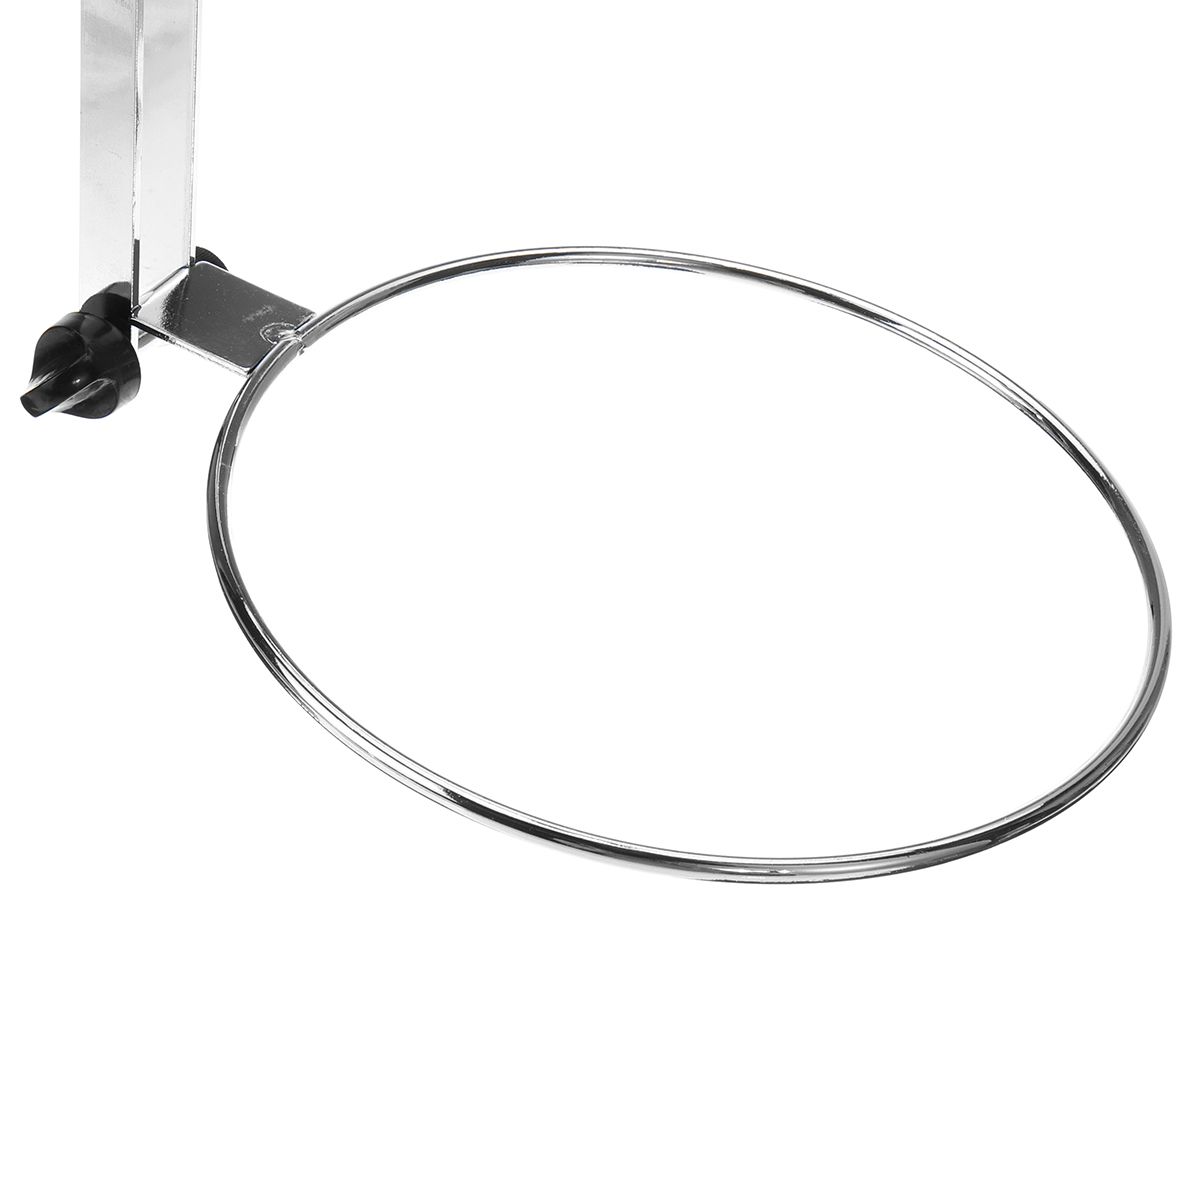 25X-120mm-Foldable-Desktop-Illuminated-Magnifier-Magnifying-Glass-Reading-Loupe-LED-Lighted-Lamp-Opt-1647047